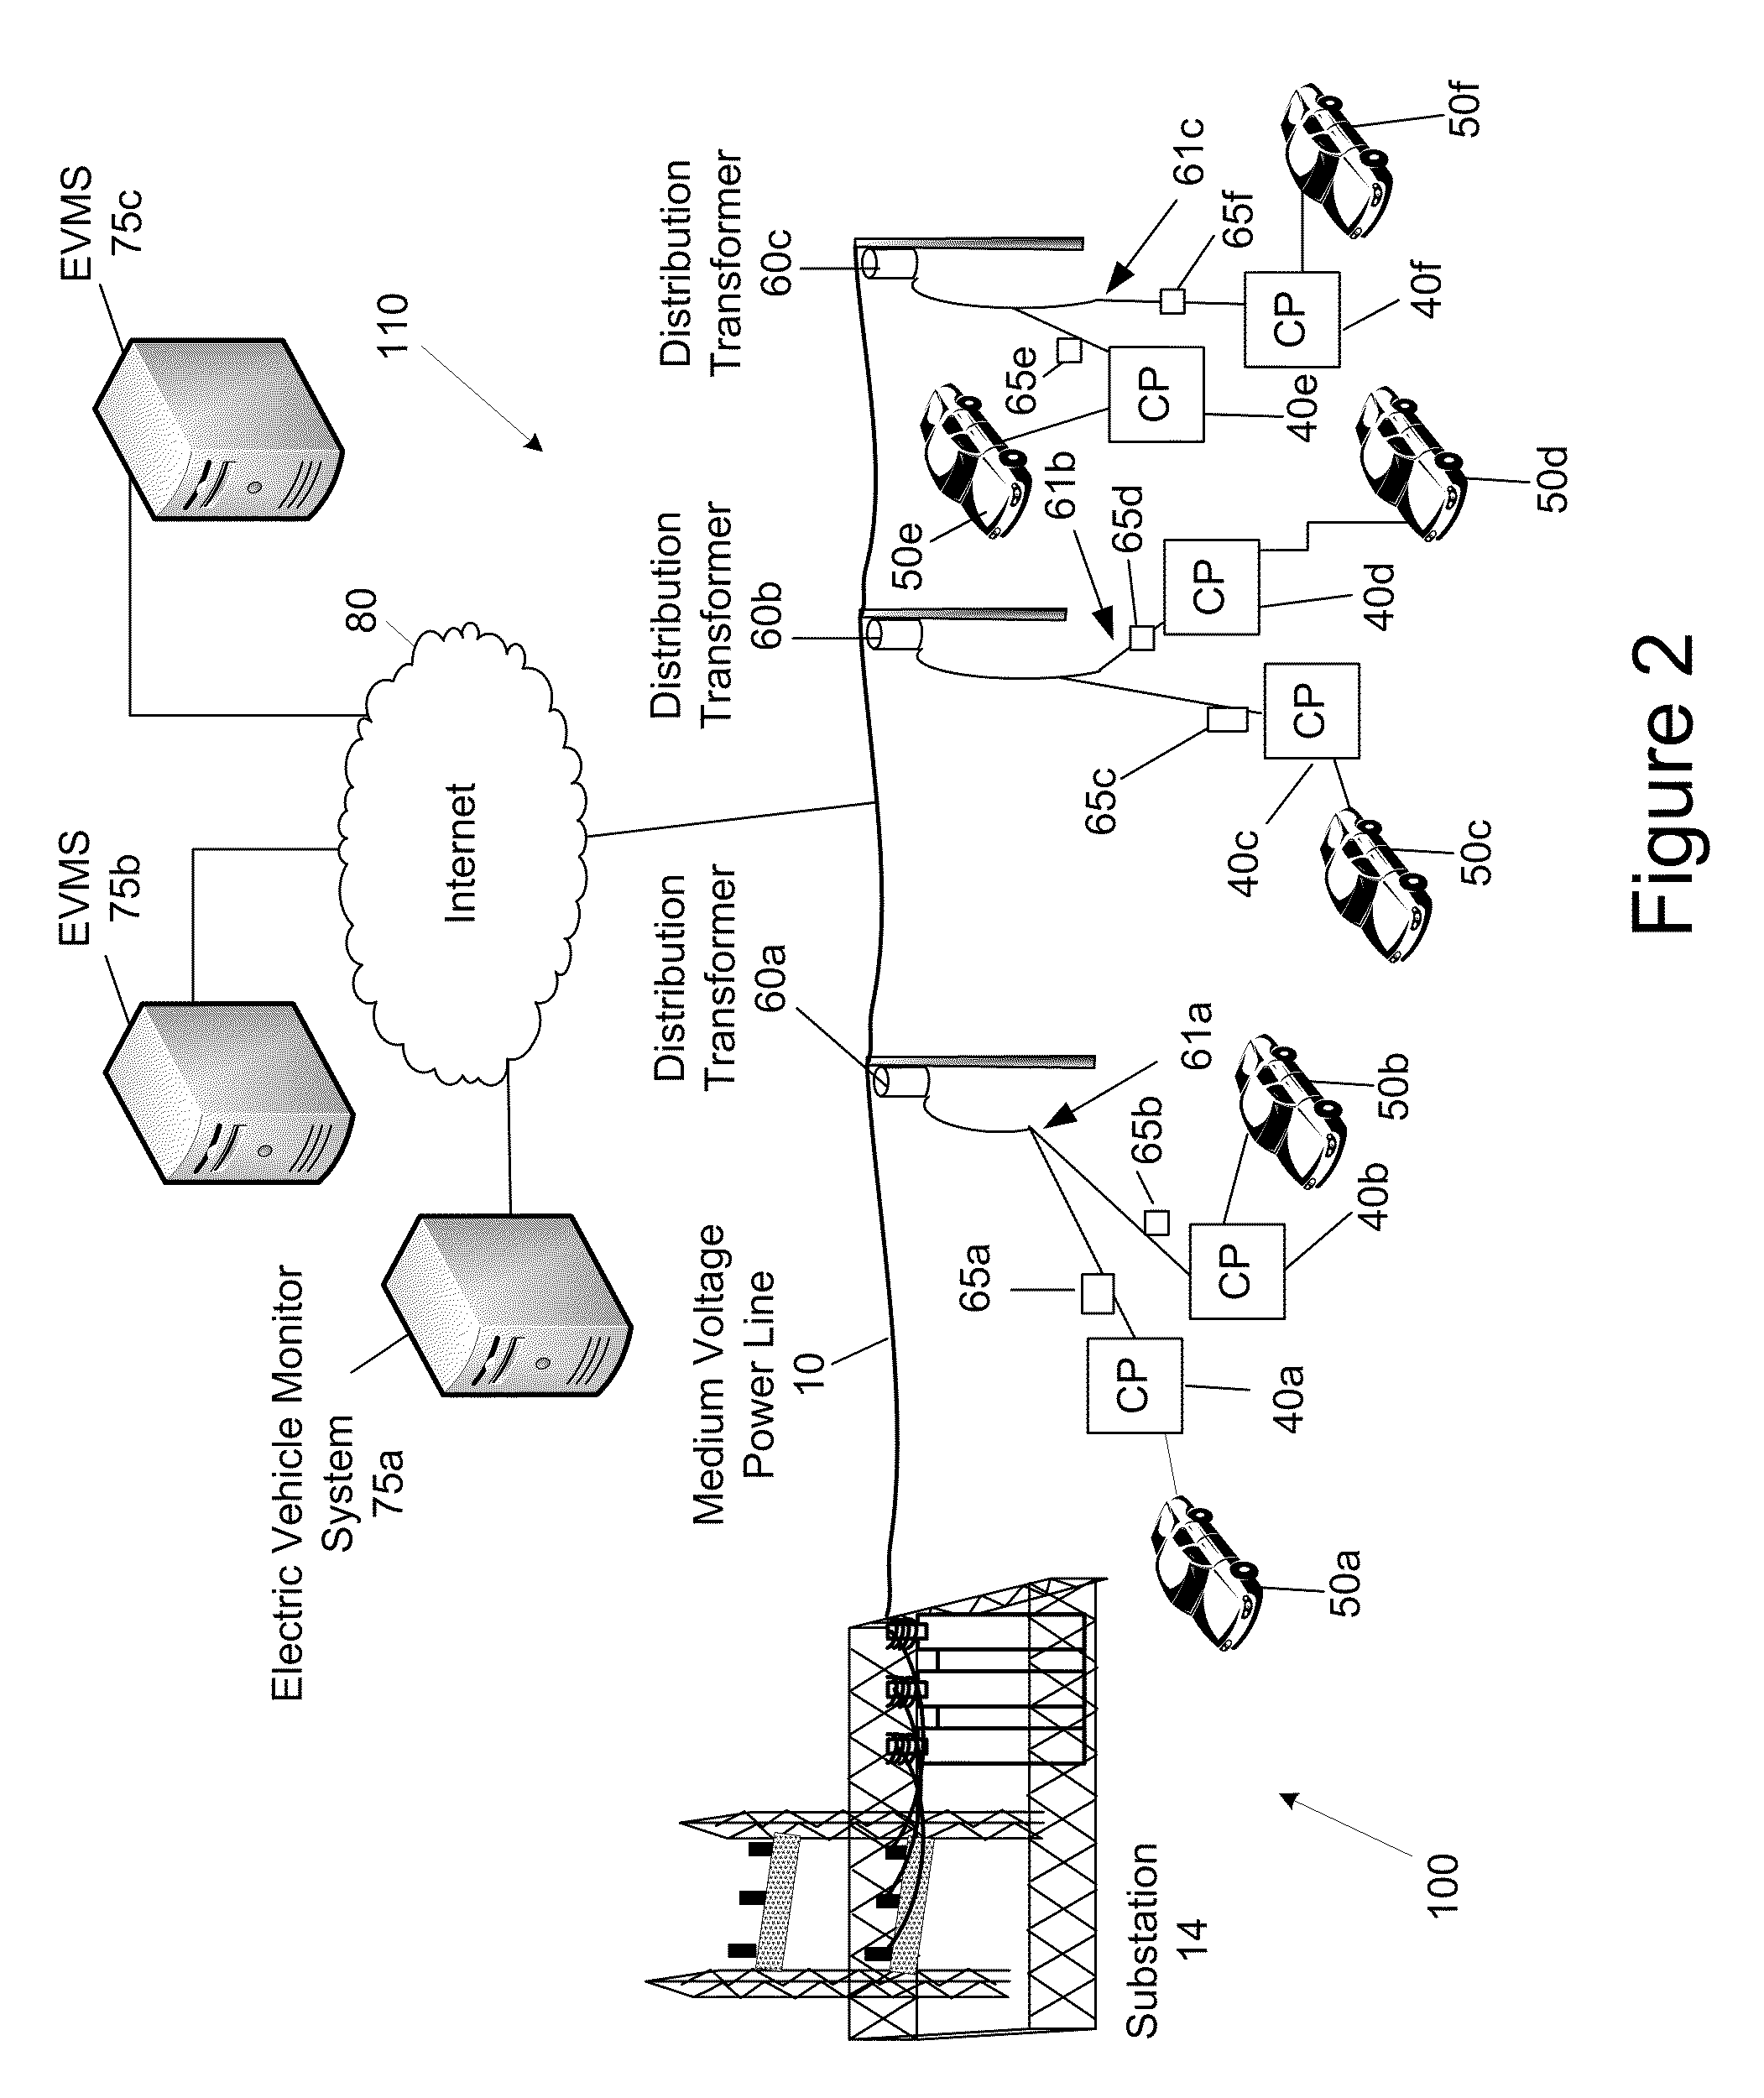 System and Method for Managing the Distributed Generation of Power by a Plurality of Electric Vehicles